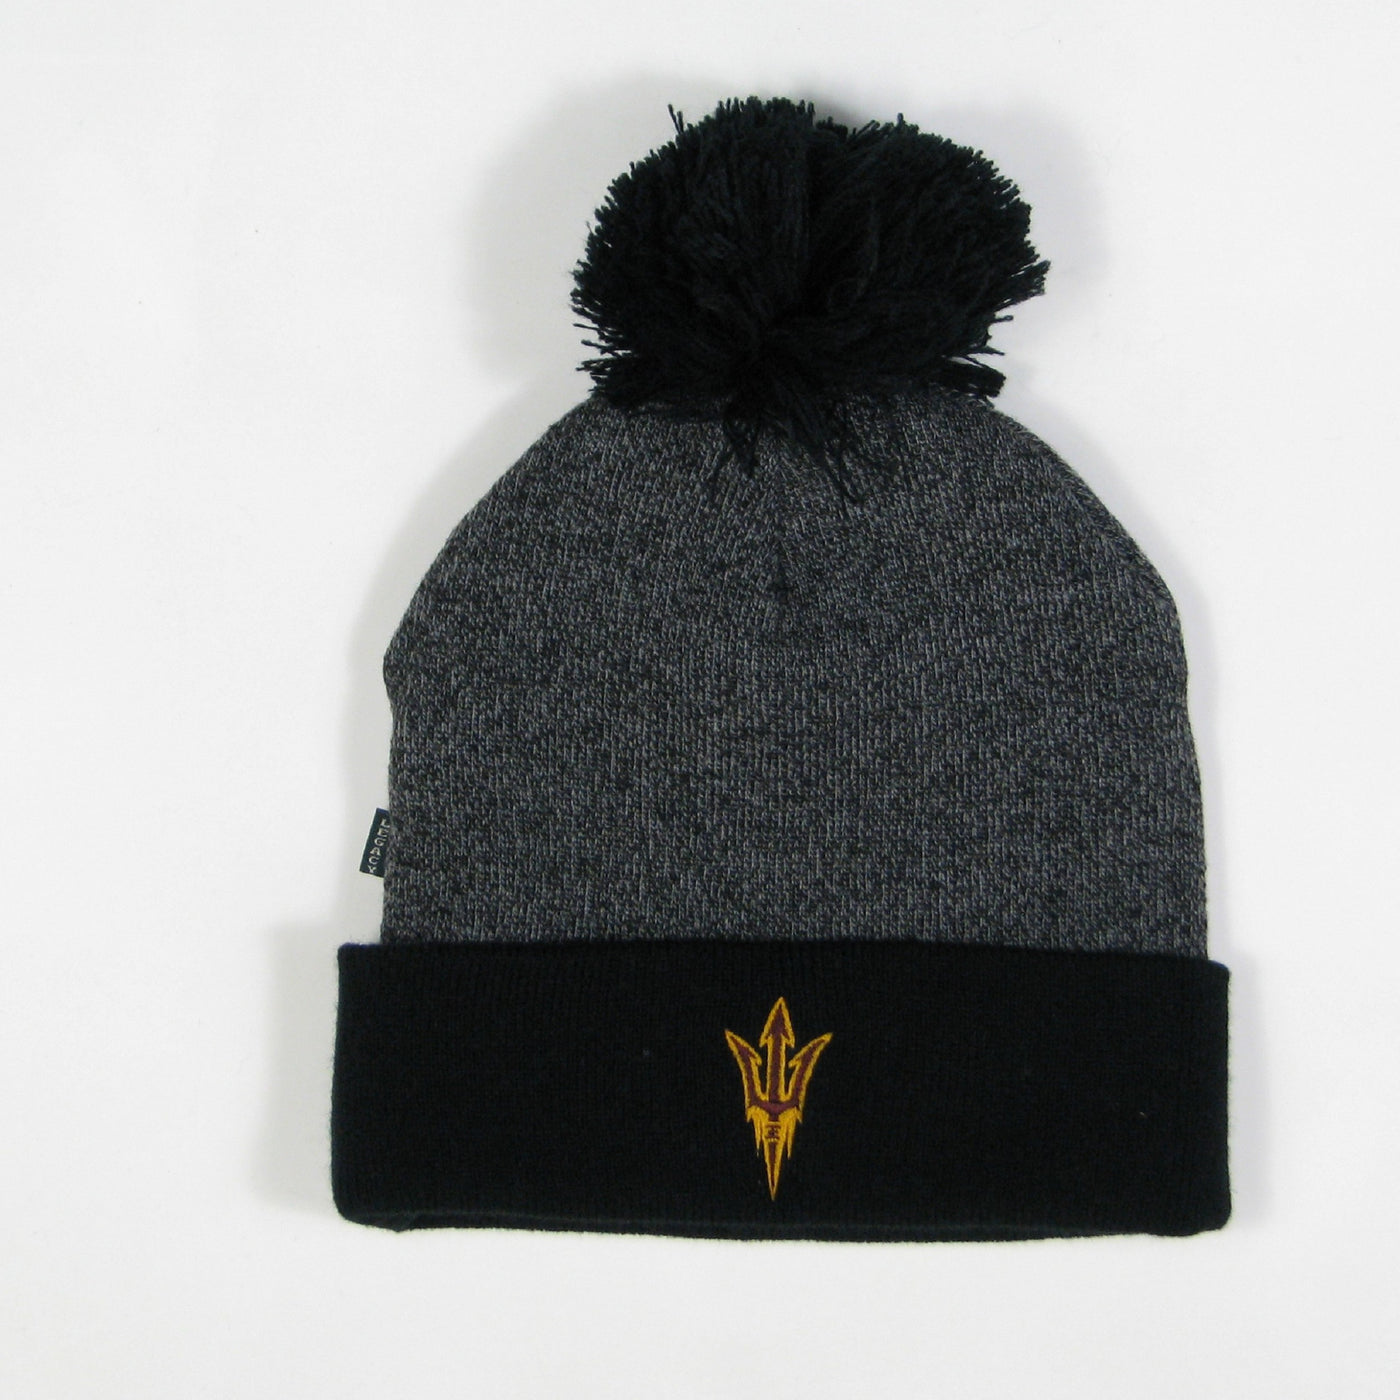 ASU charcoal cuffed beanie with black pom pom and cuff and a pitchfork patch on the cuff